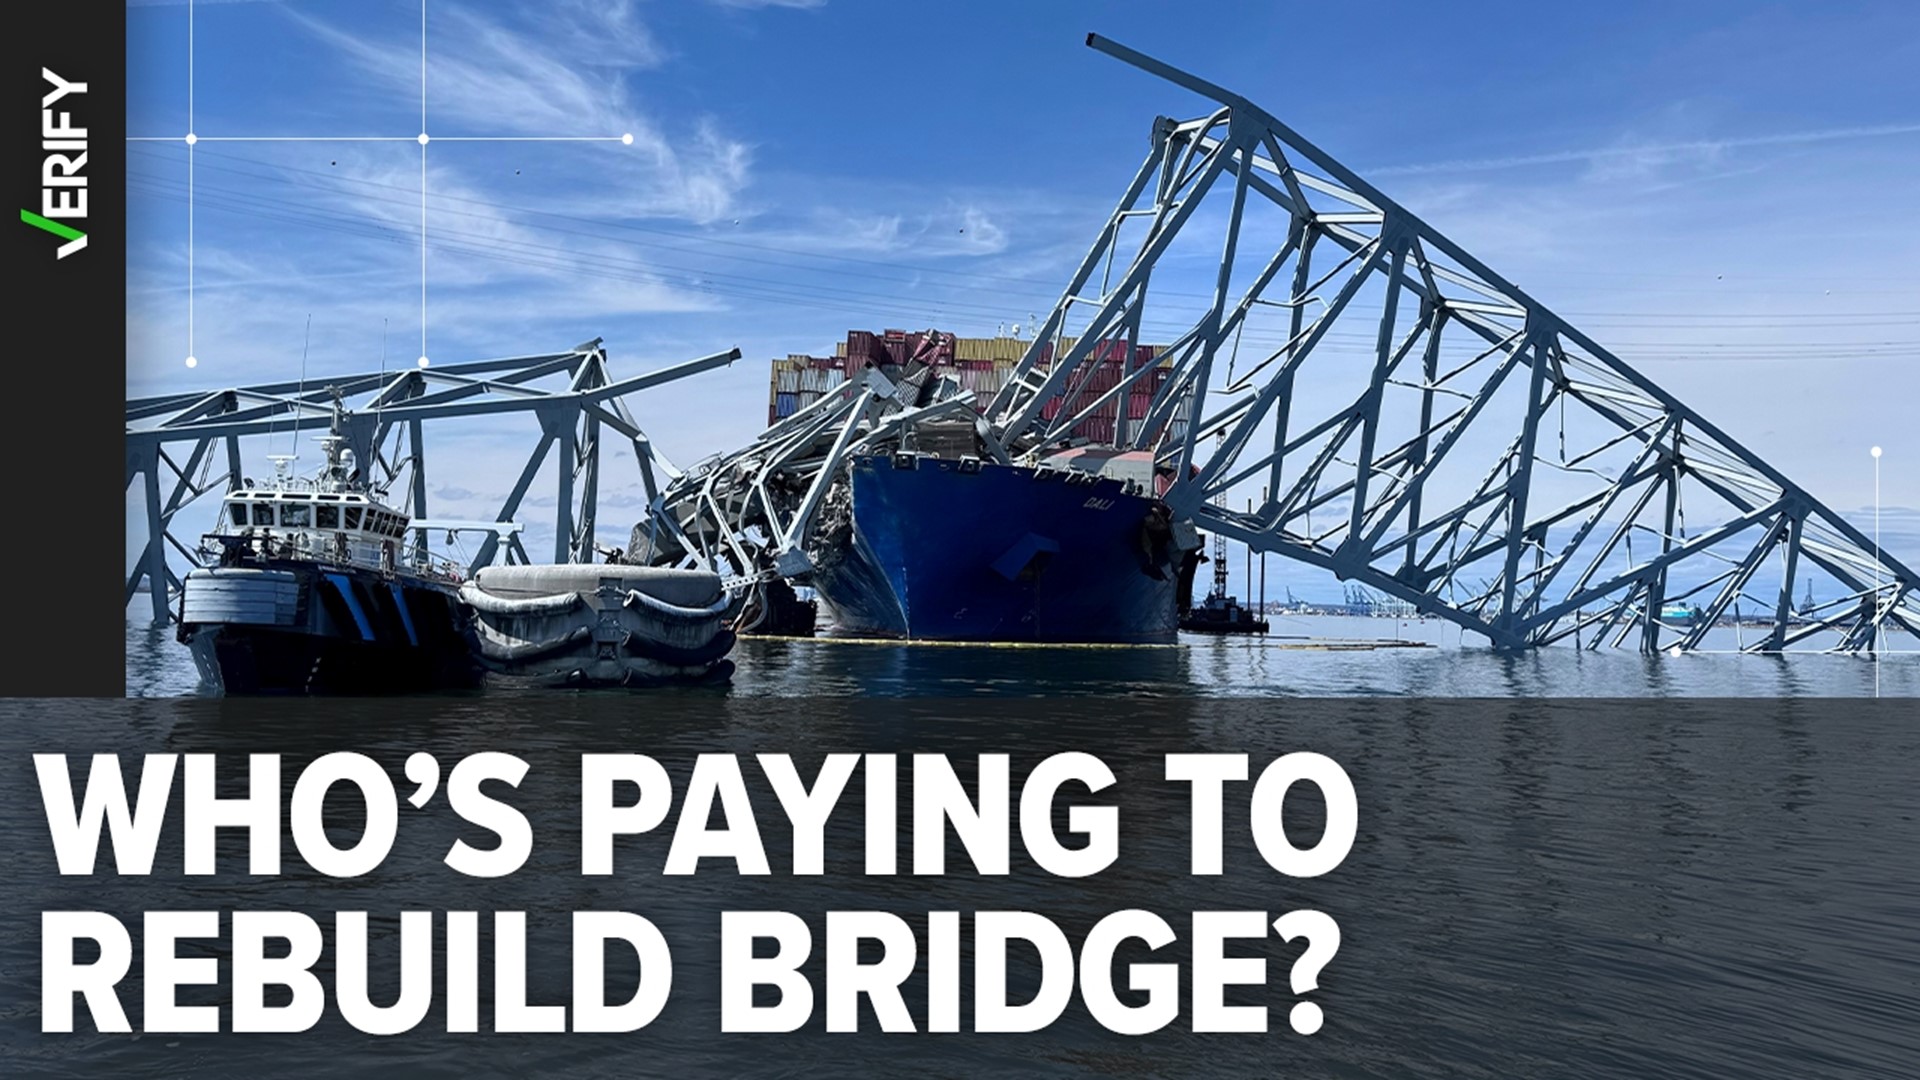 President Biden said the federal government should pay to rebuild the Francis Scott Key Bridge in Baltimore. Here’s what we can VERIFY about who will foot the bill.